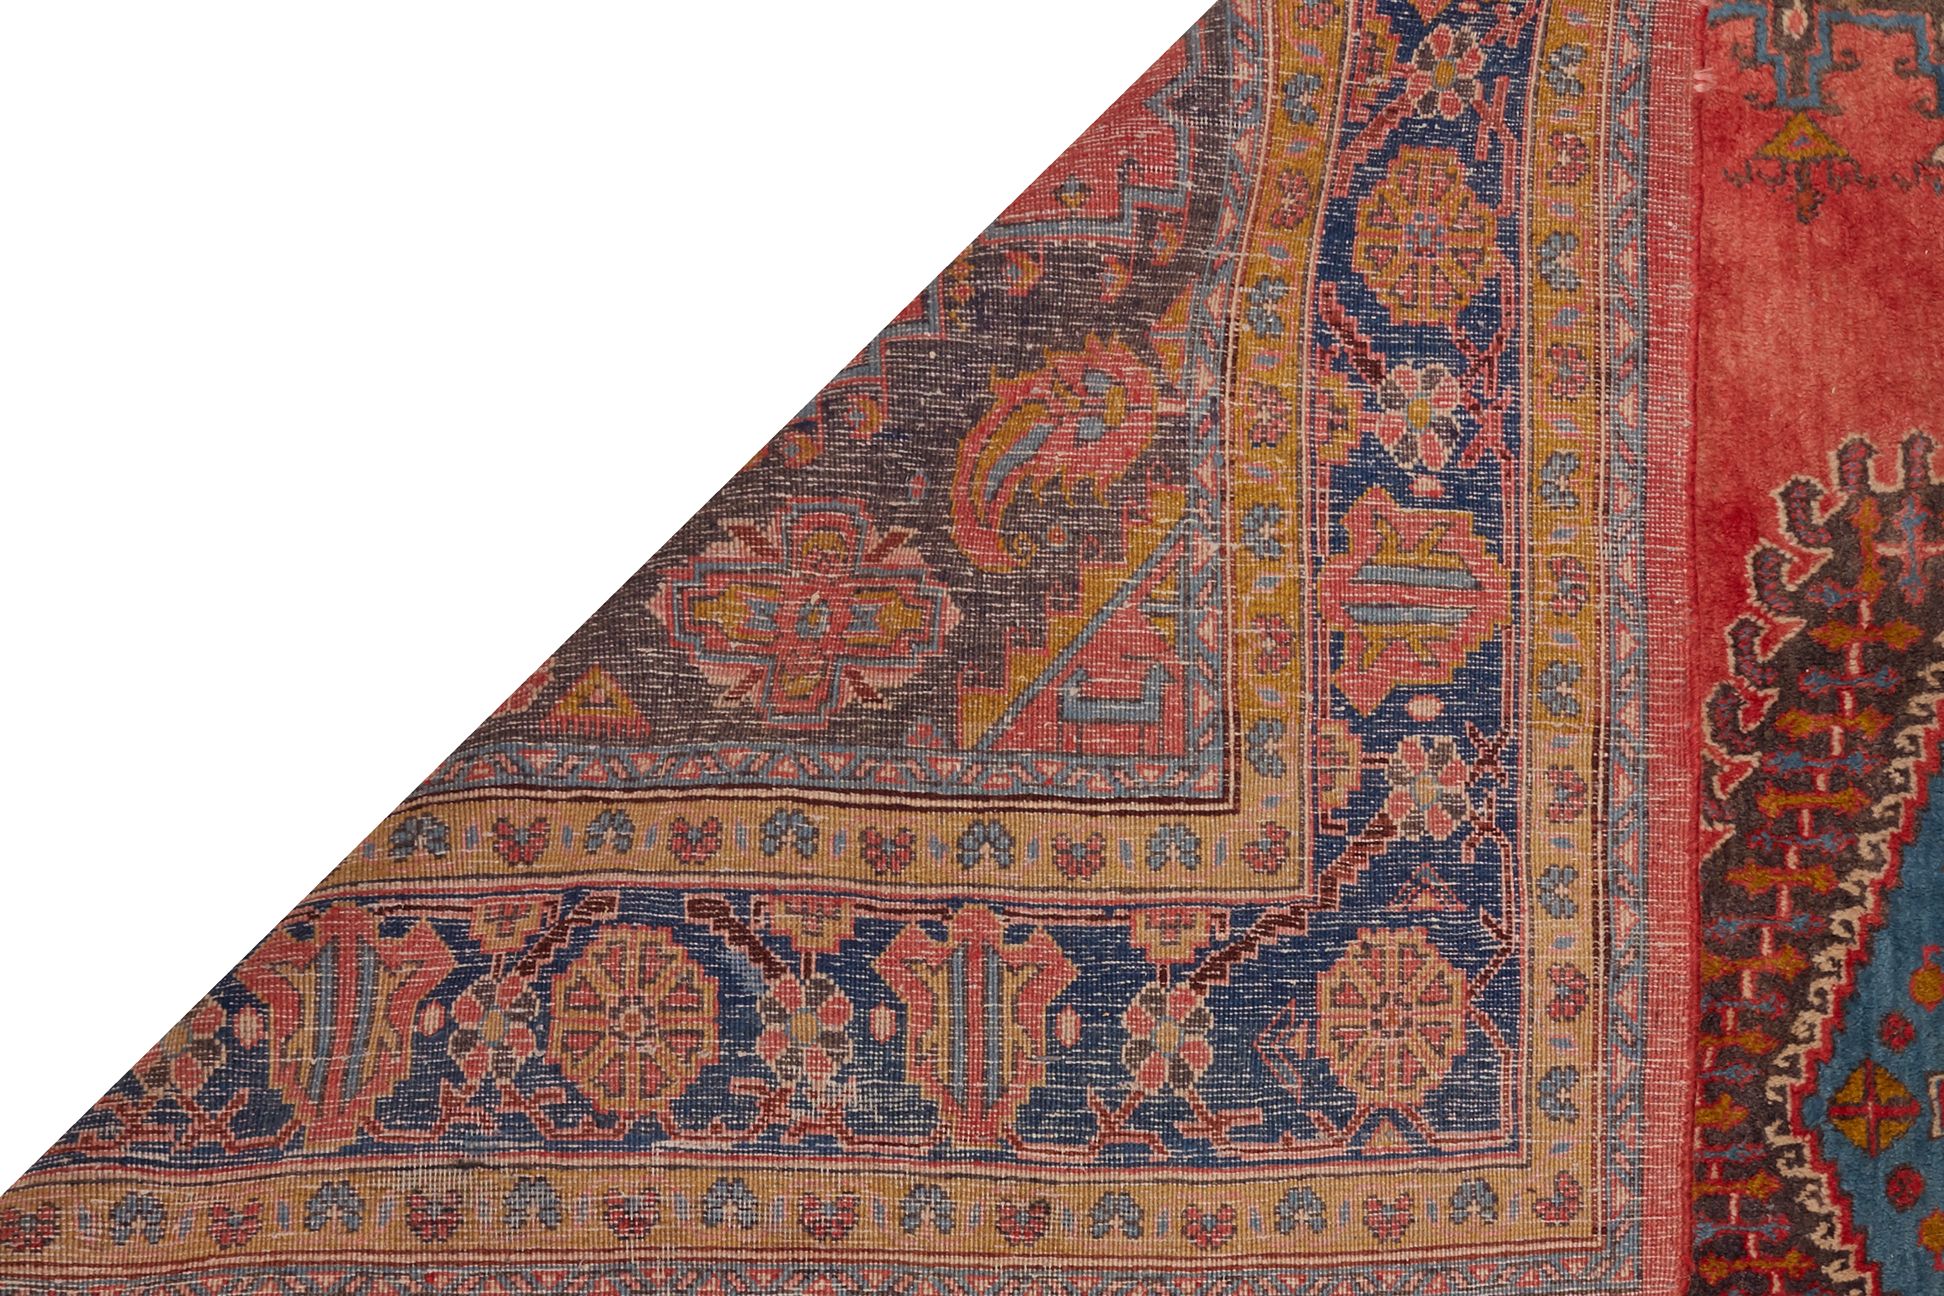 A LARGE PERSIAN MEDALLION CARPET - Image 2 of 2